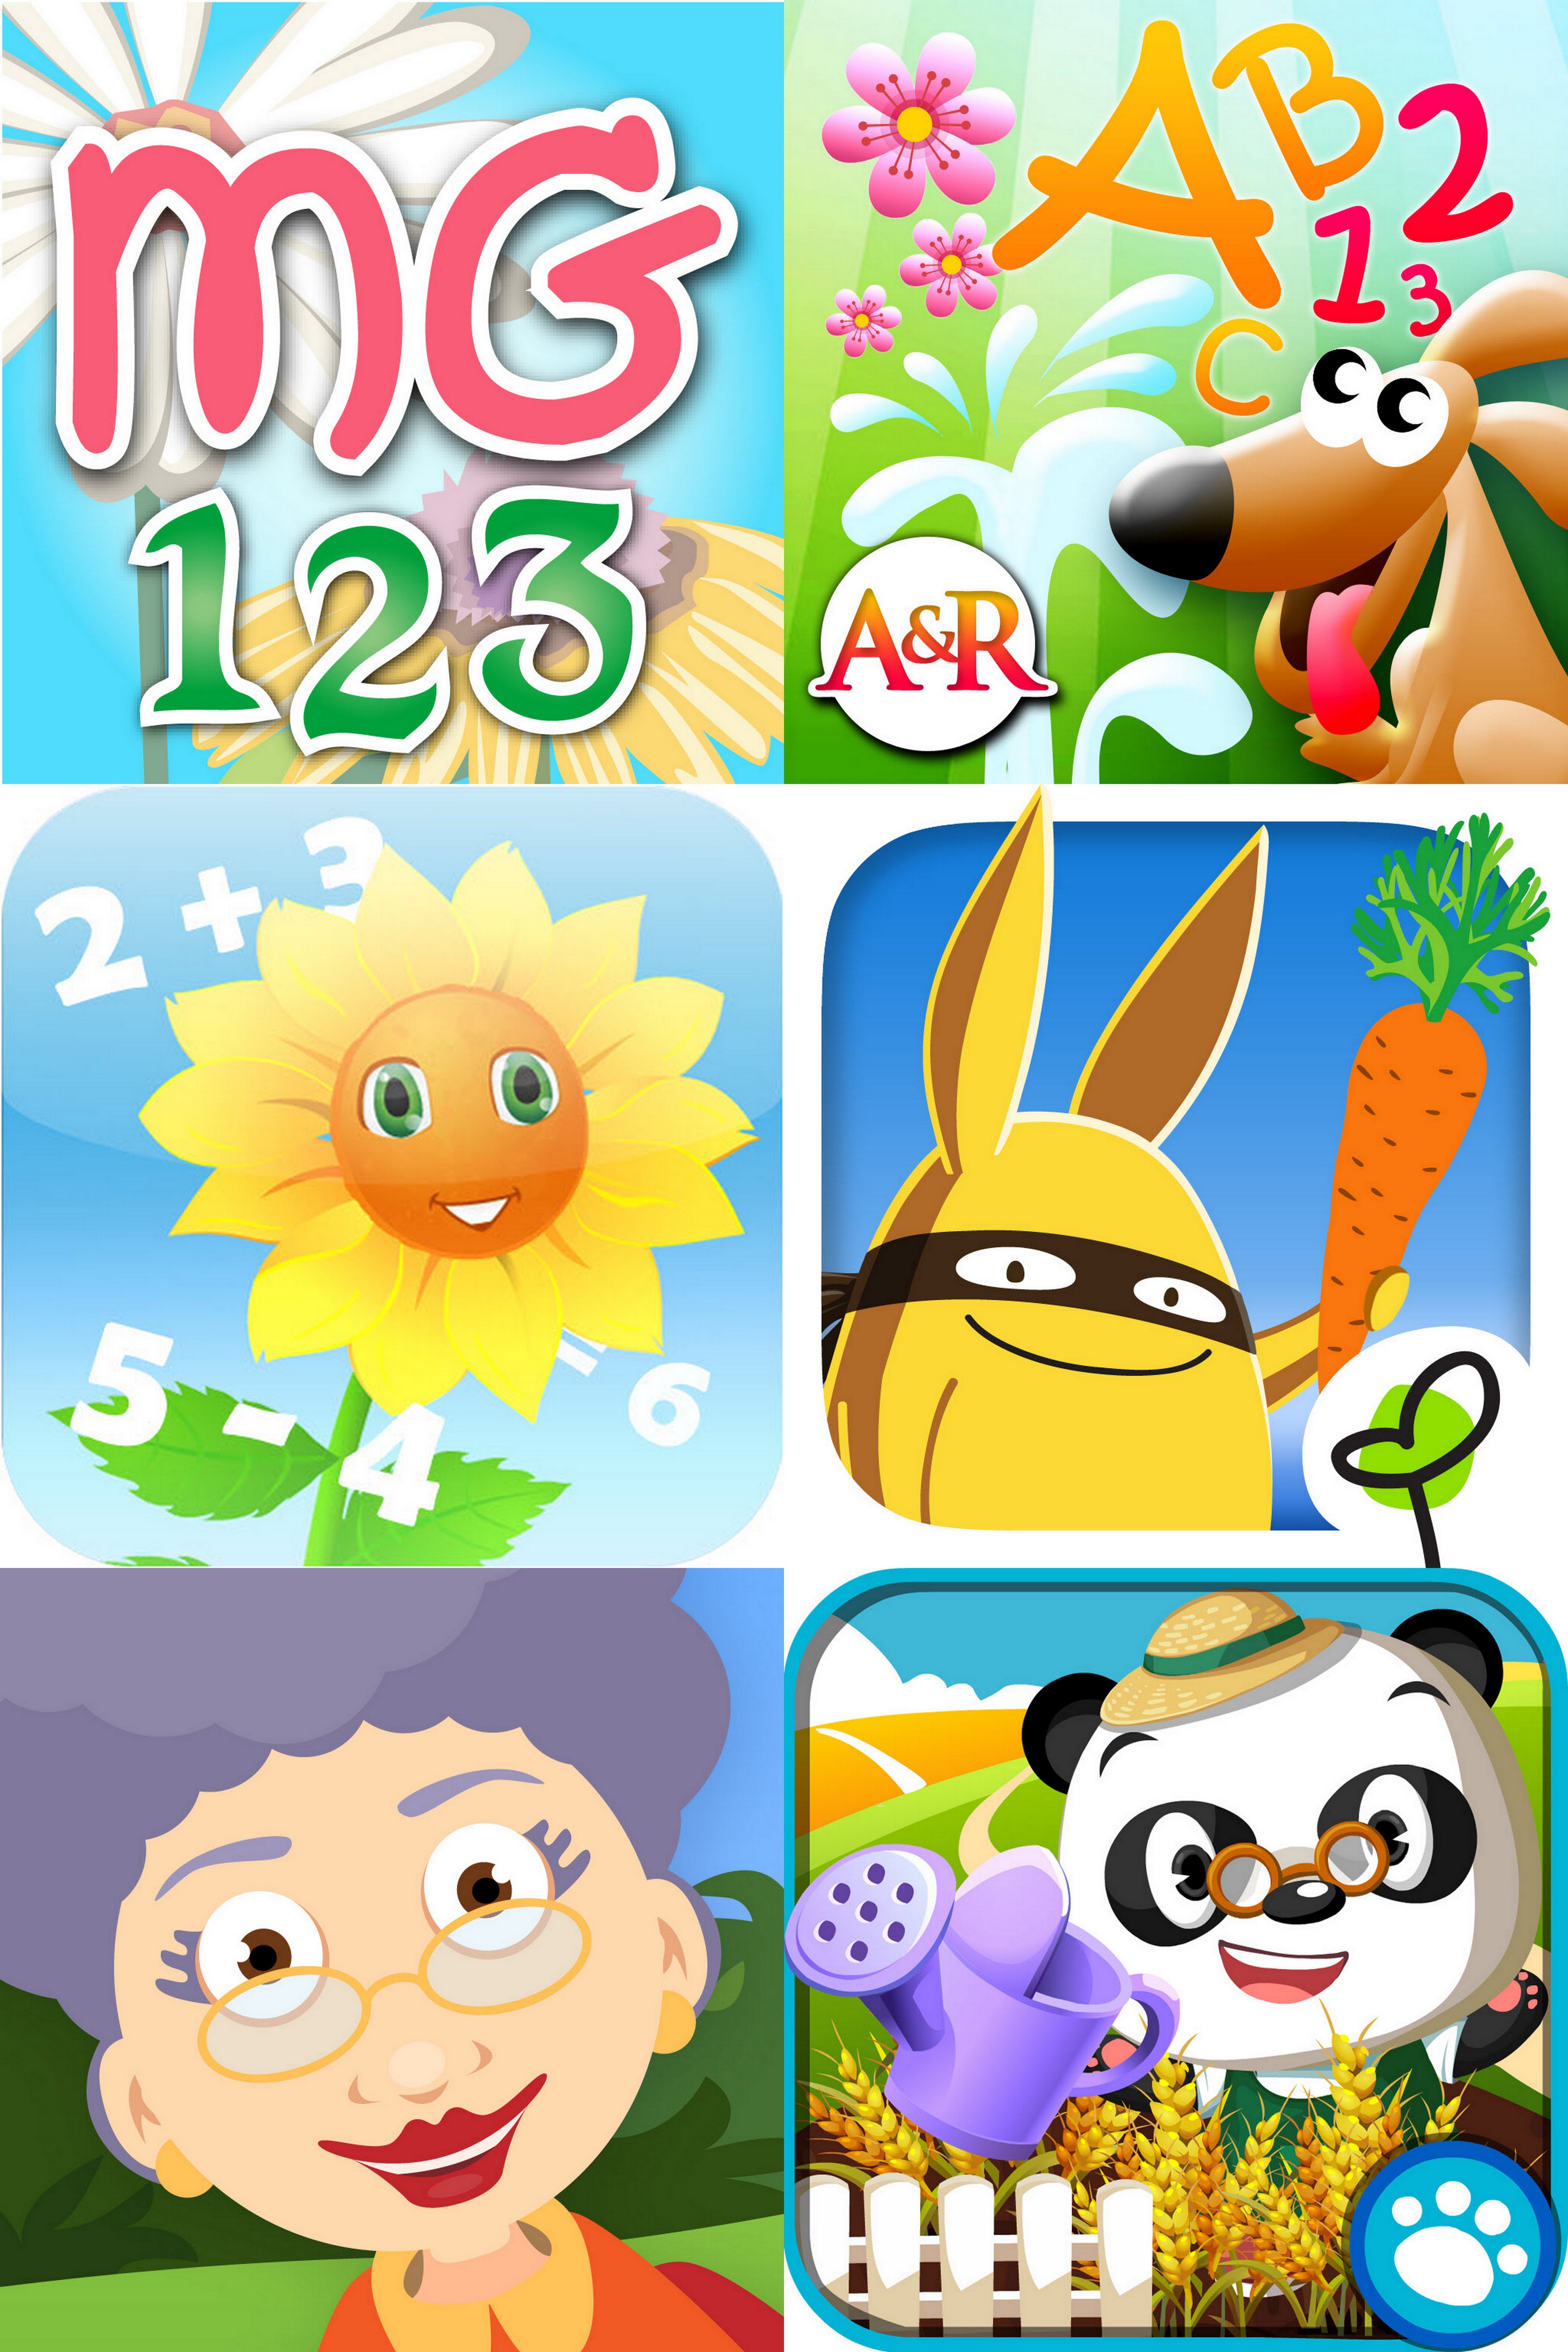 gardening apps for kids iphone and android